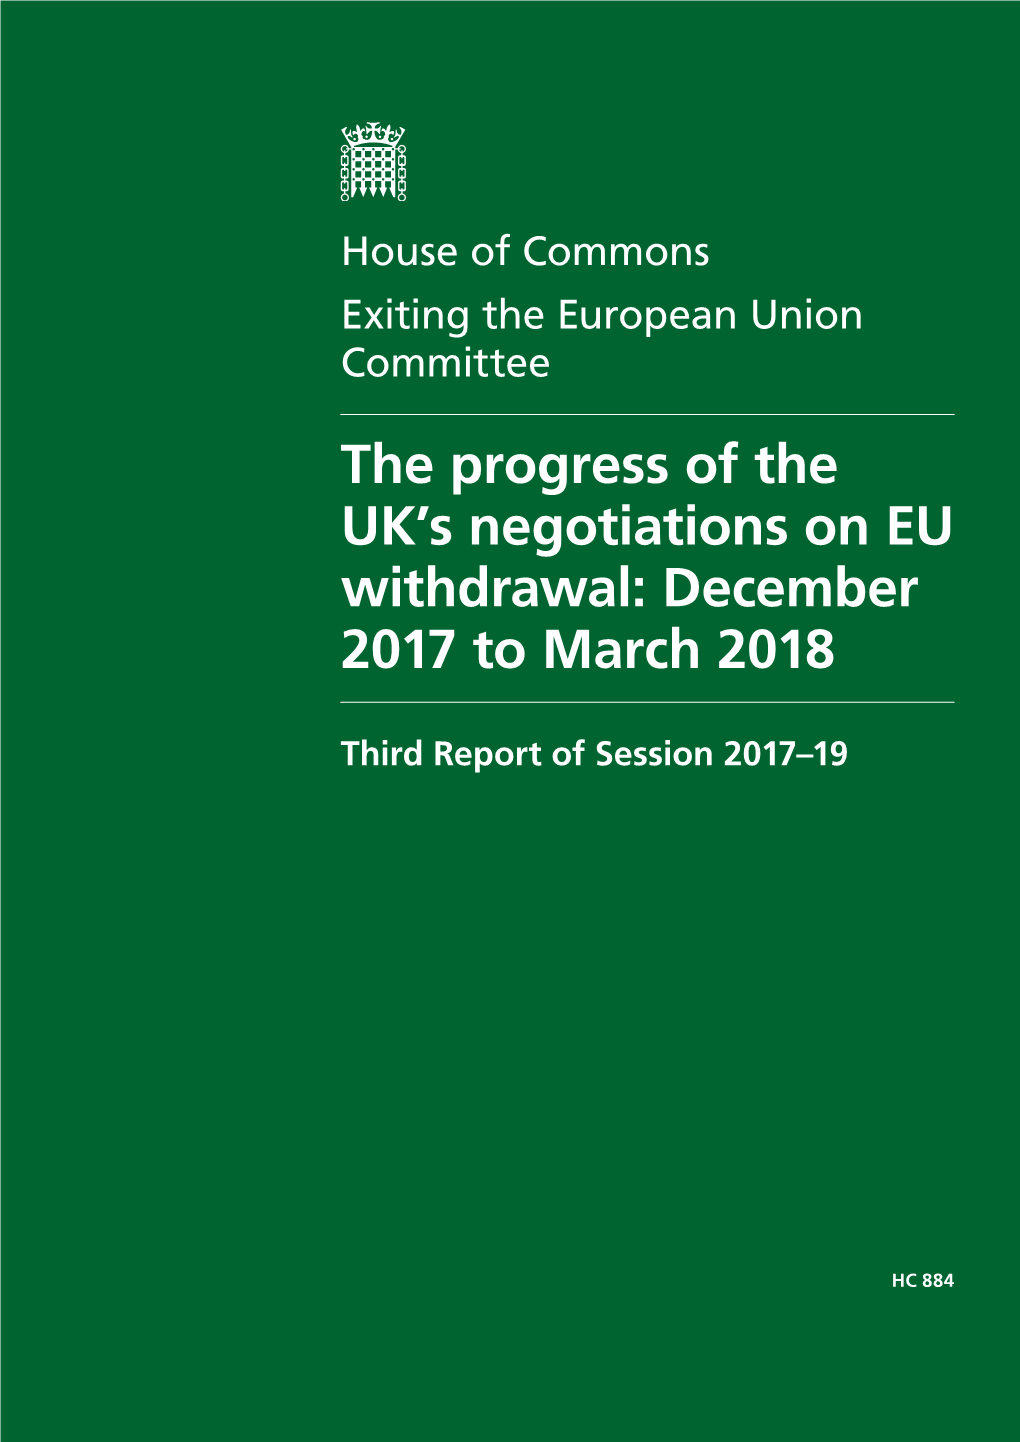 The Progress of the UK's Negotiations on EU Withdrawal